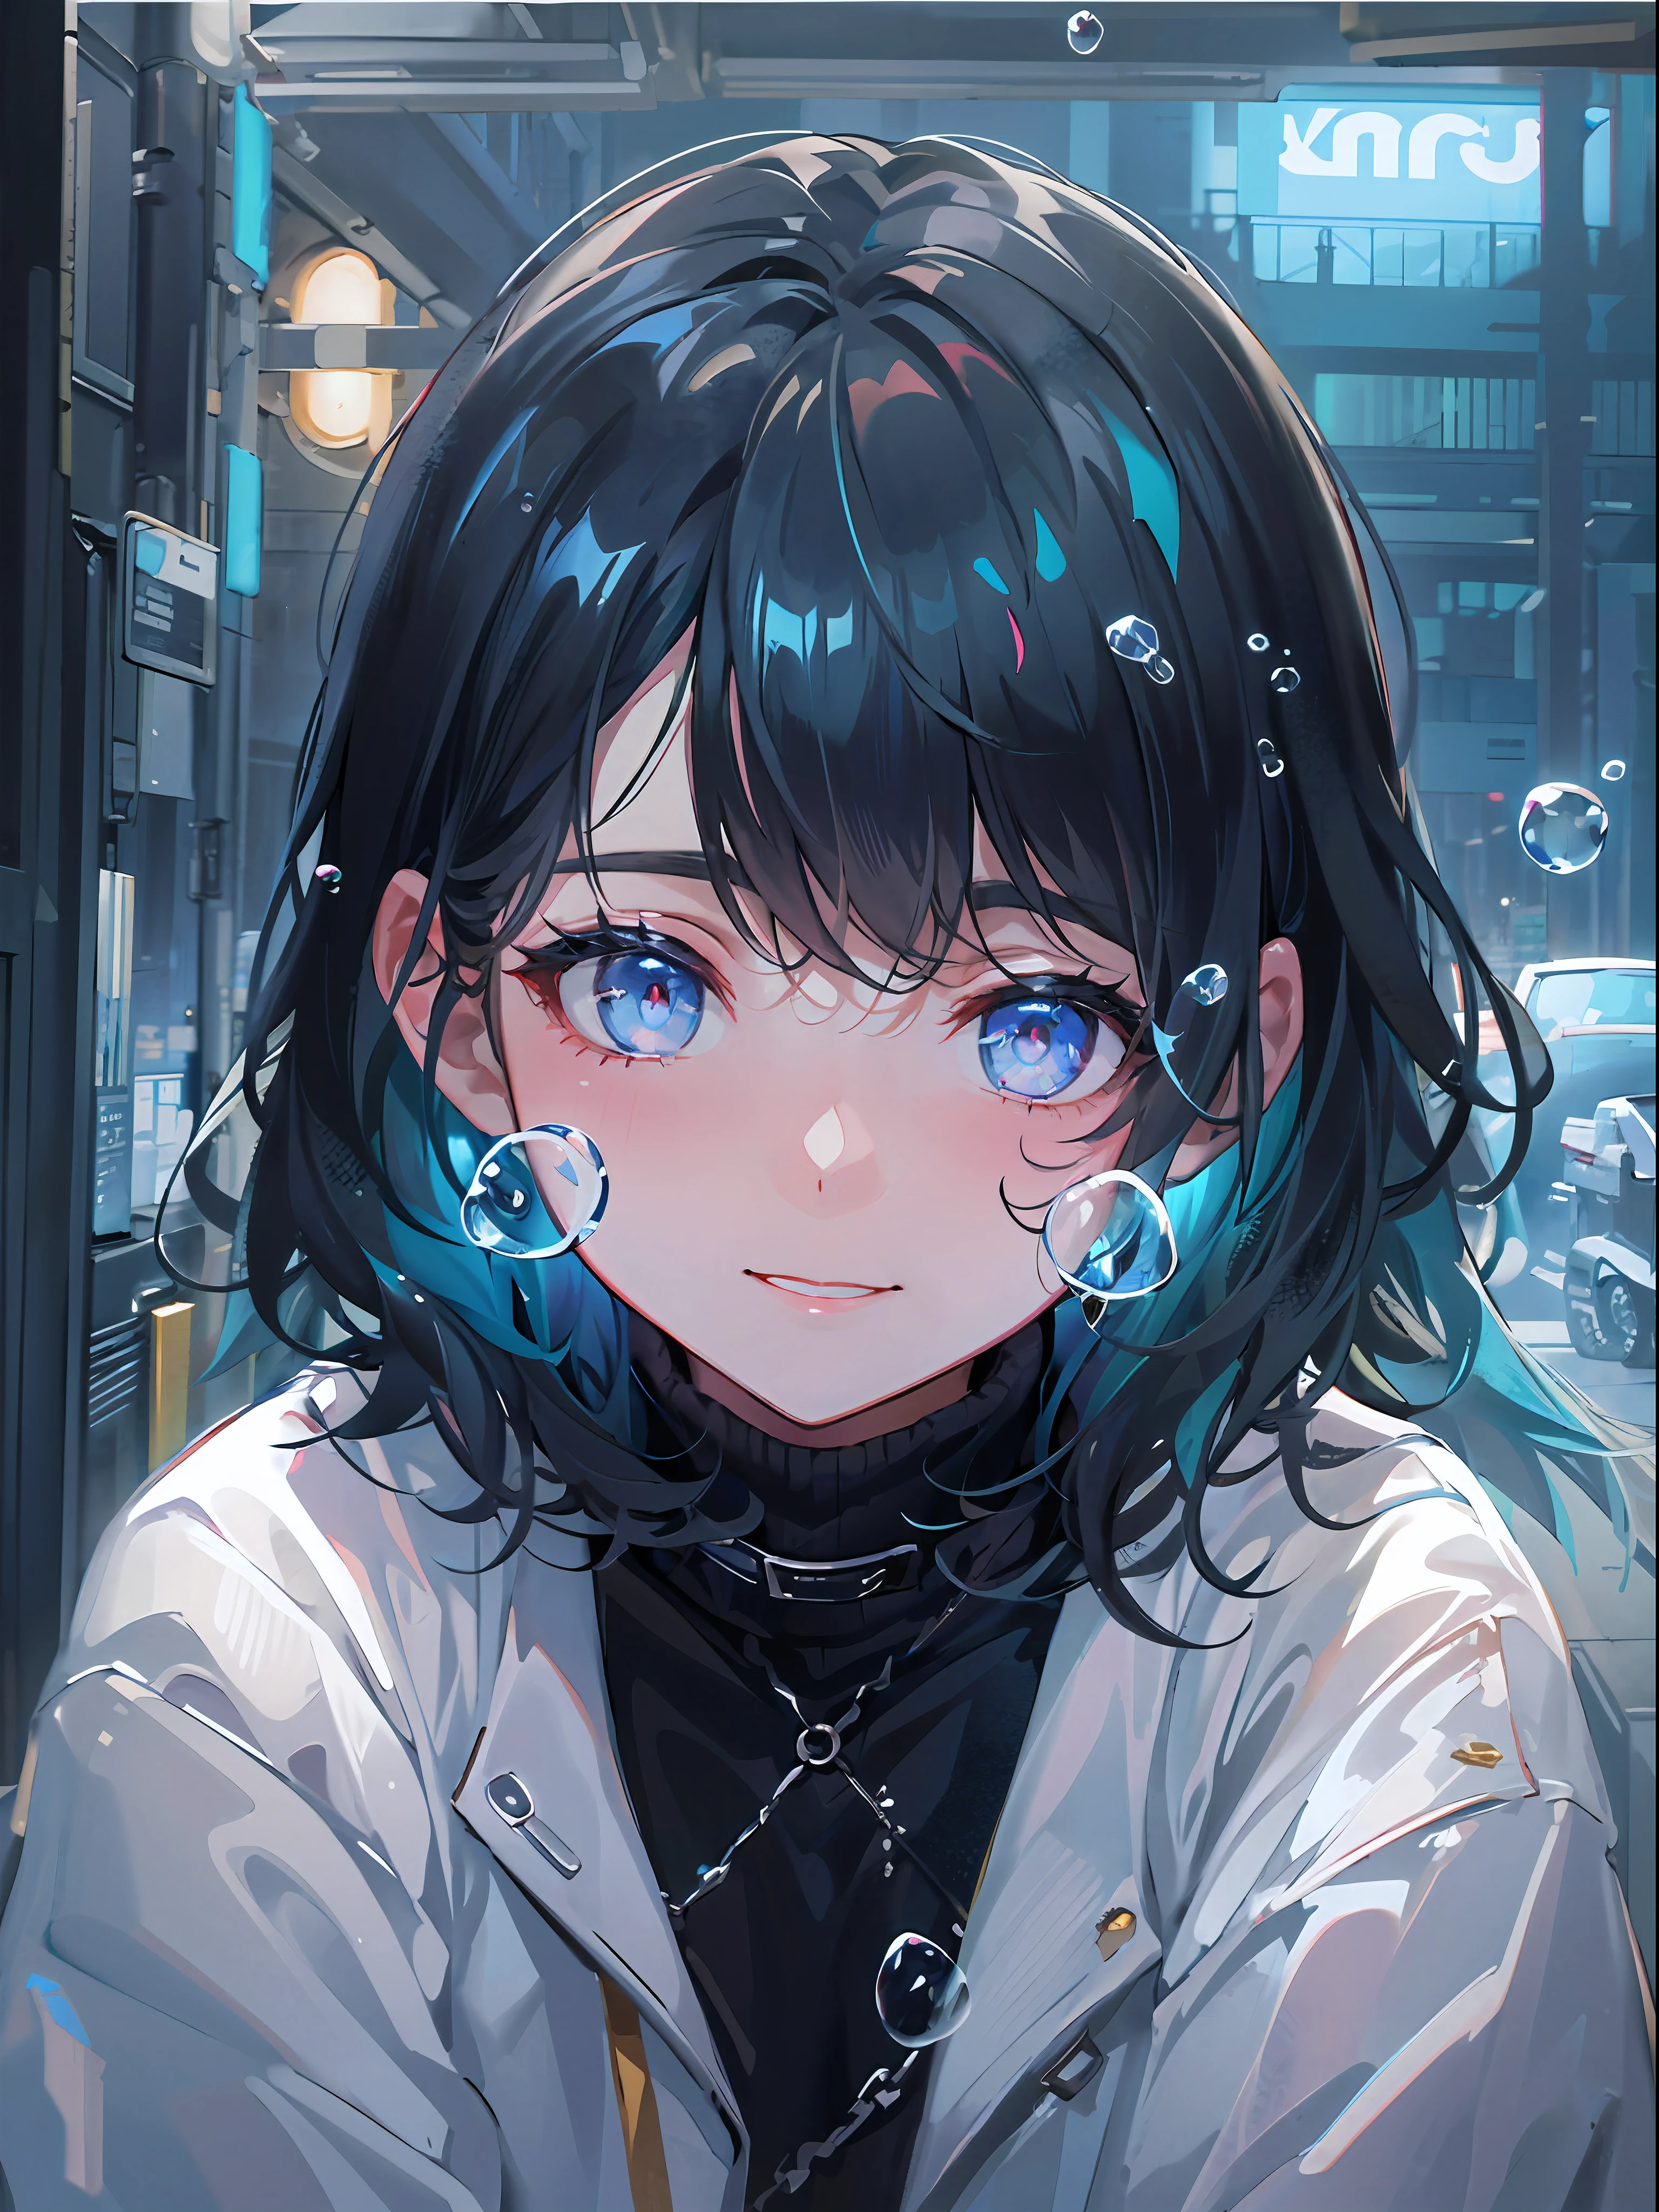 ((top-quality)), ((​masterpiece)), ((Ultra-detail)), (extremely delicate and beautiful), girl with, solo, cold attitude,((Black jacket)),She is very(relax)with  the(Settled down)Looks,A darK-haired, depth of fields,evil smile,Bubble, under the water, Air bubble,bright light blue eyes,Inner color with black hair and light blue tips,Cold background,Bob Hair - Linear Art, shortpants、knee high socks、Camisole inner shirt、White uniform